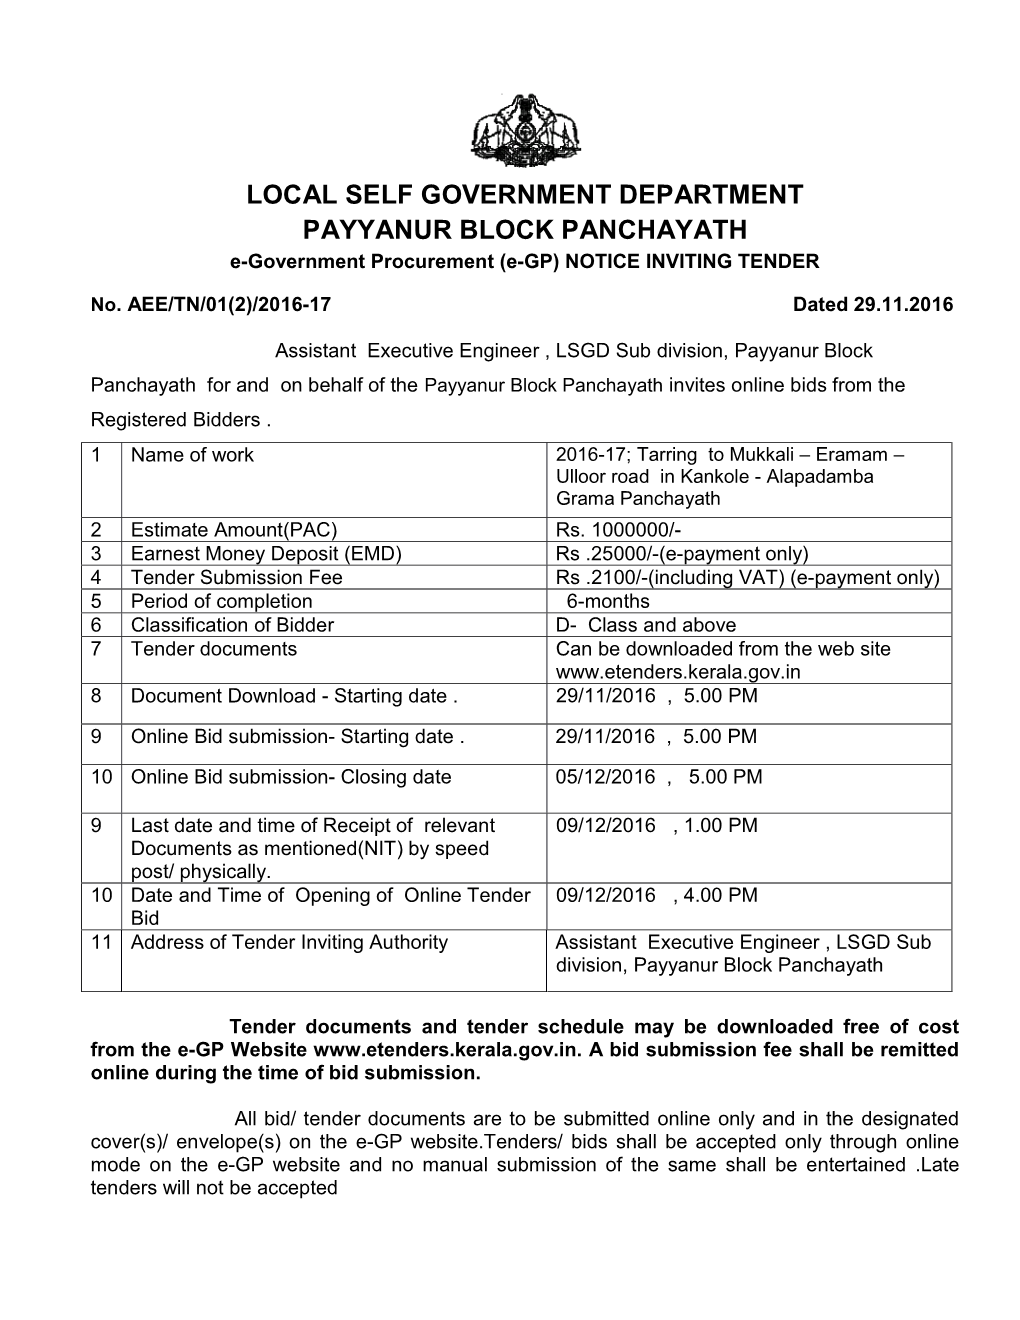 LOCAL SELF GOVERNMENT DEPARTMENT PAYYANUR BLOCK PANCHAYATH E-Government Procurement (E-GP) NOTICE INVITING TENDER